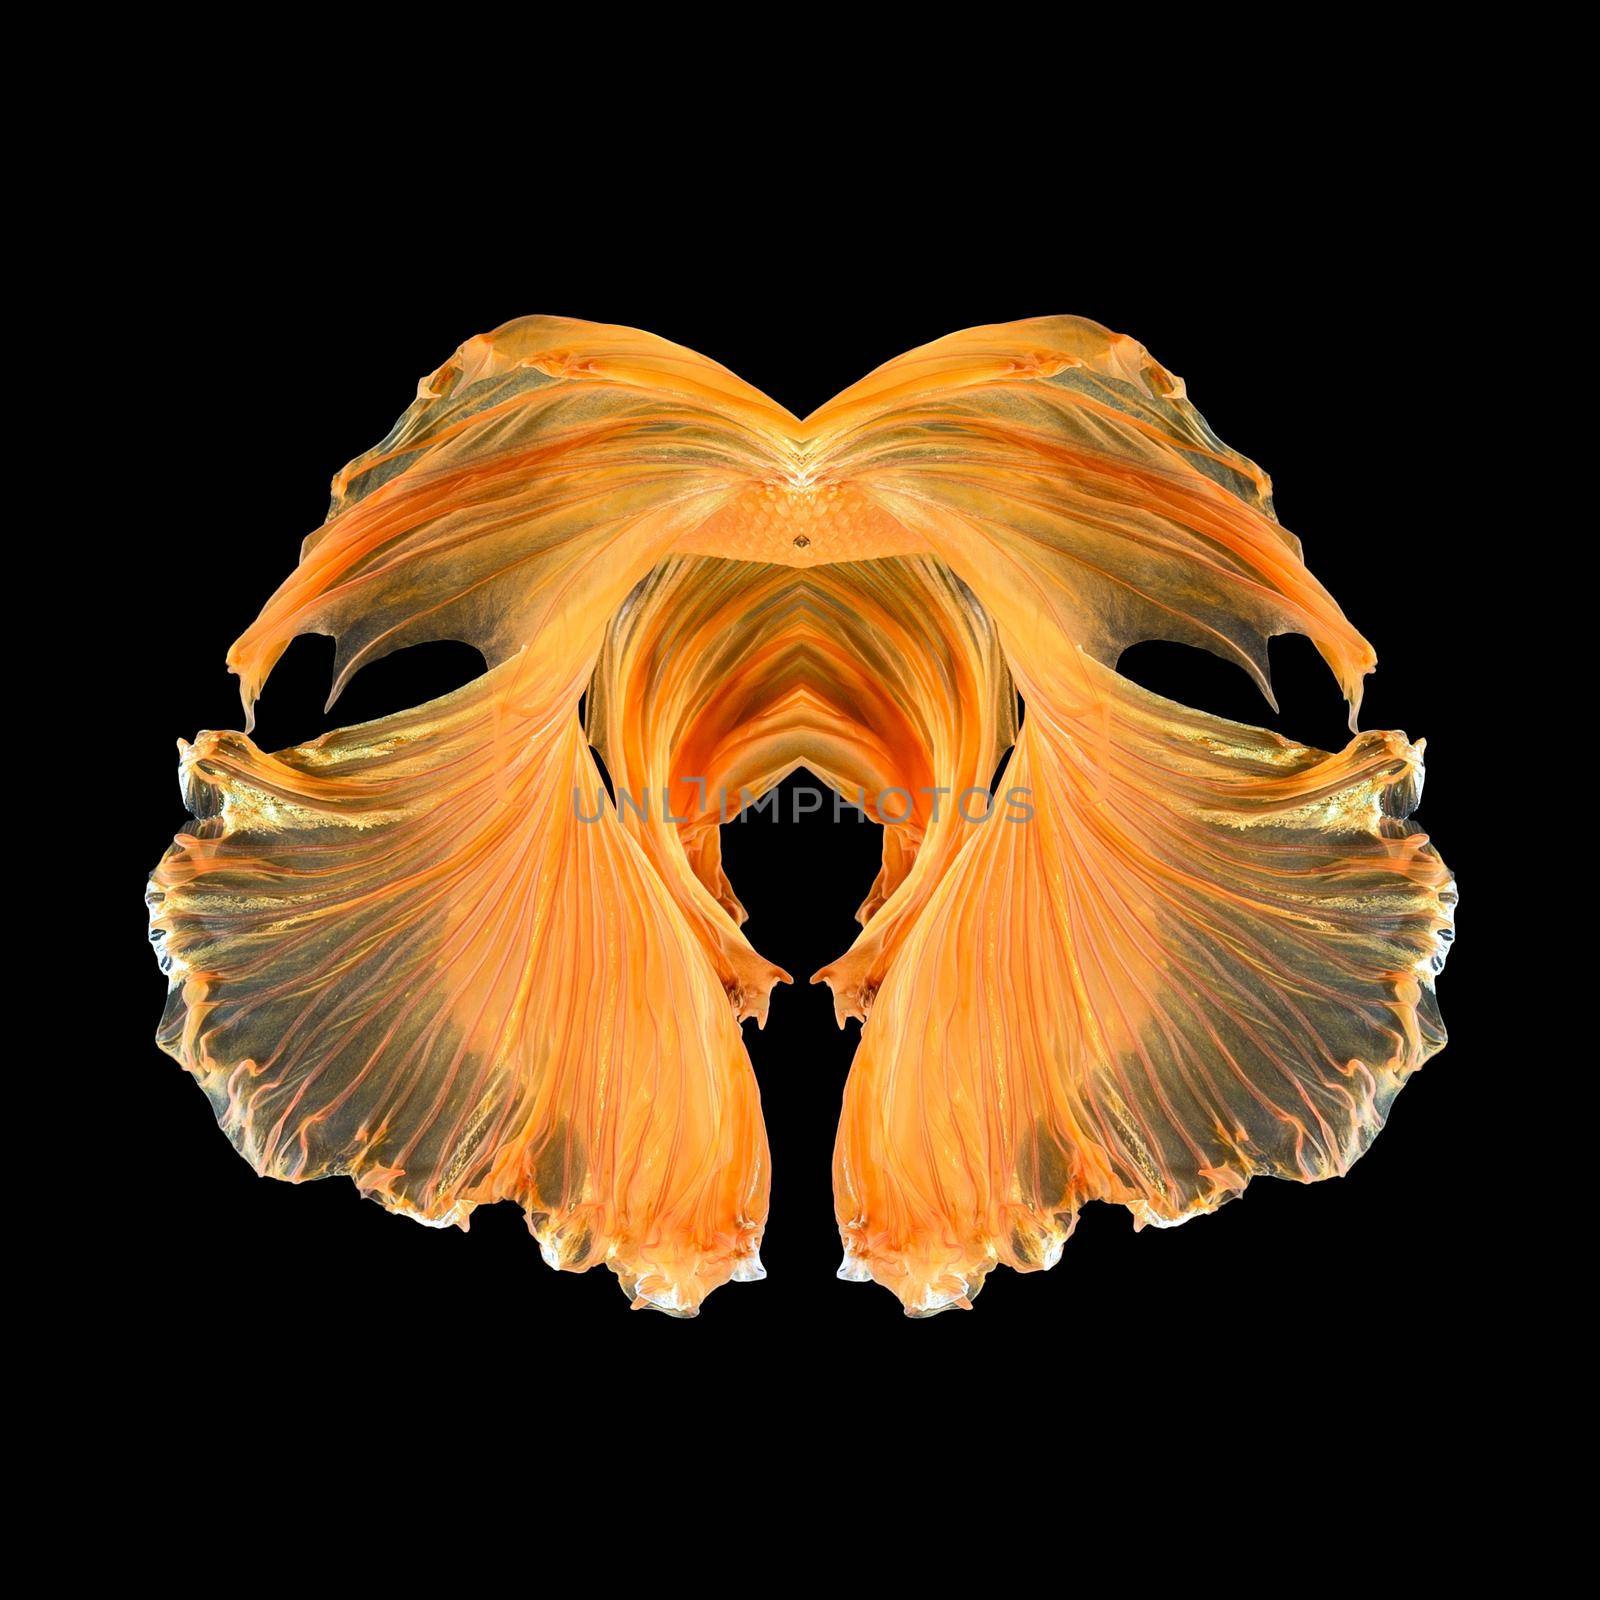 Abstract fine art fish tail free form of Betta fish or Siamese fighting fish isolated on black background. by Nuamfolio